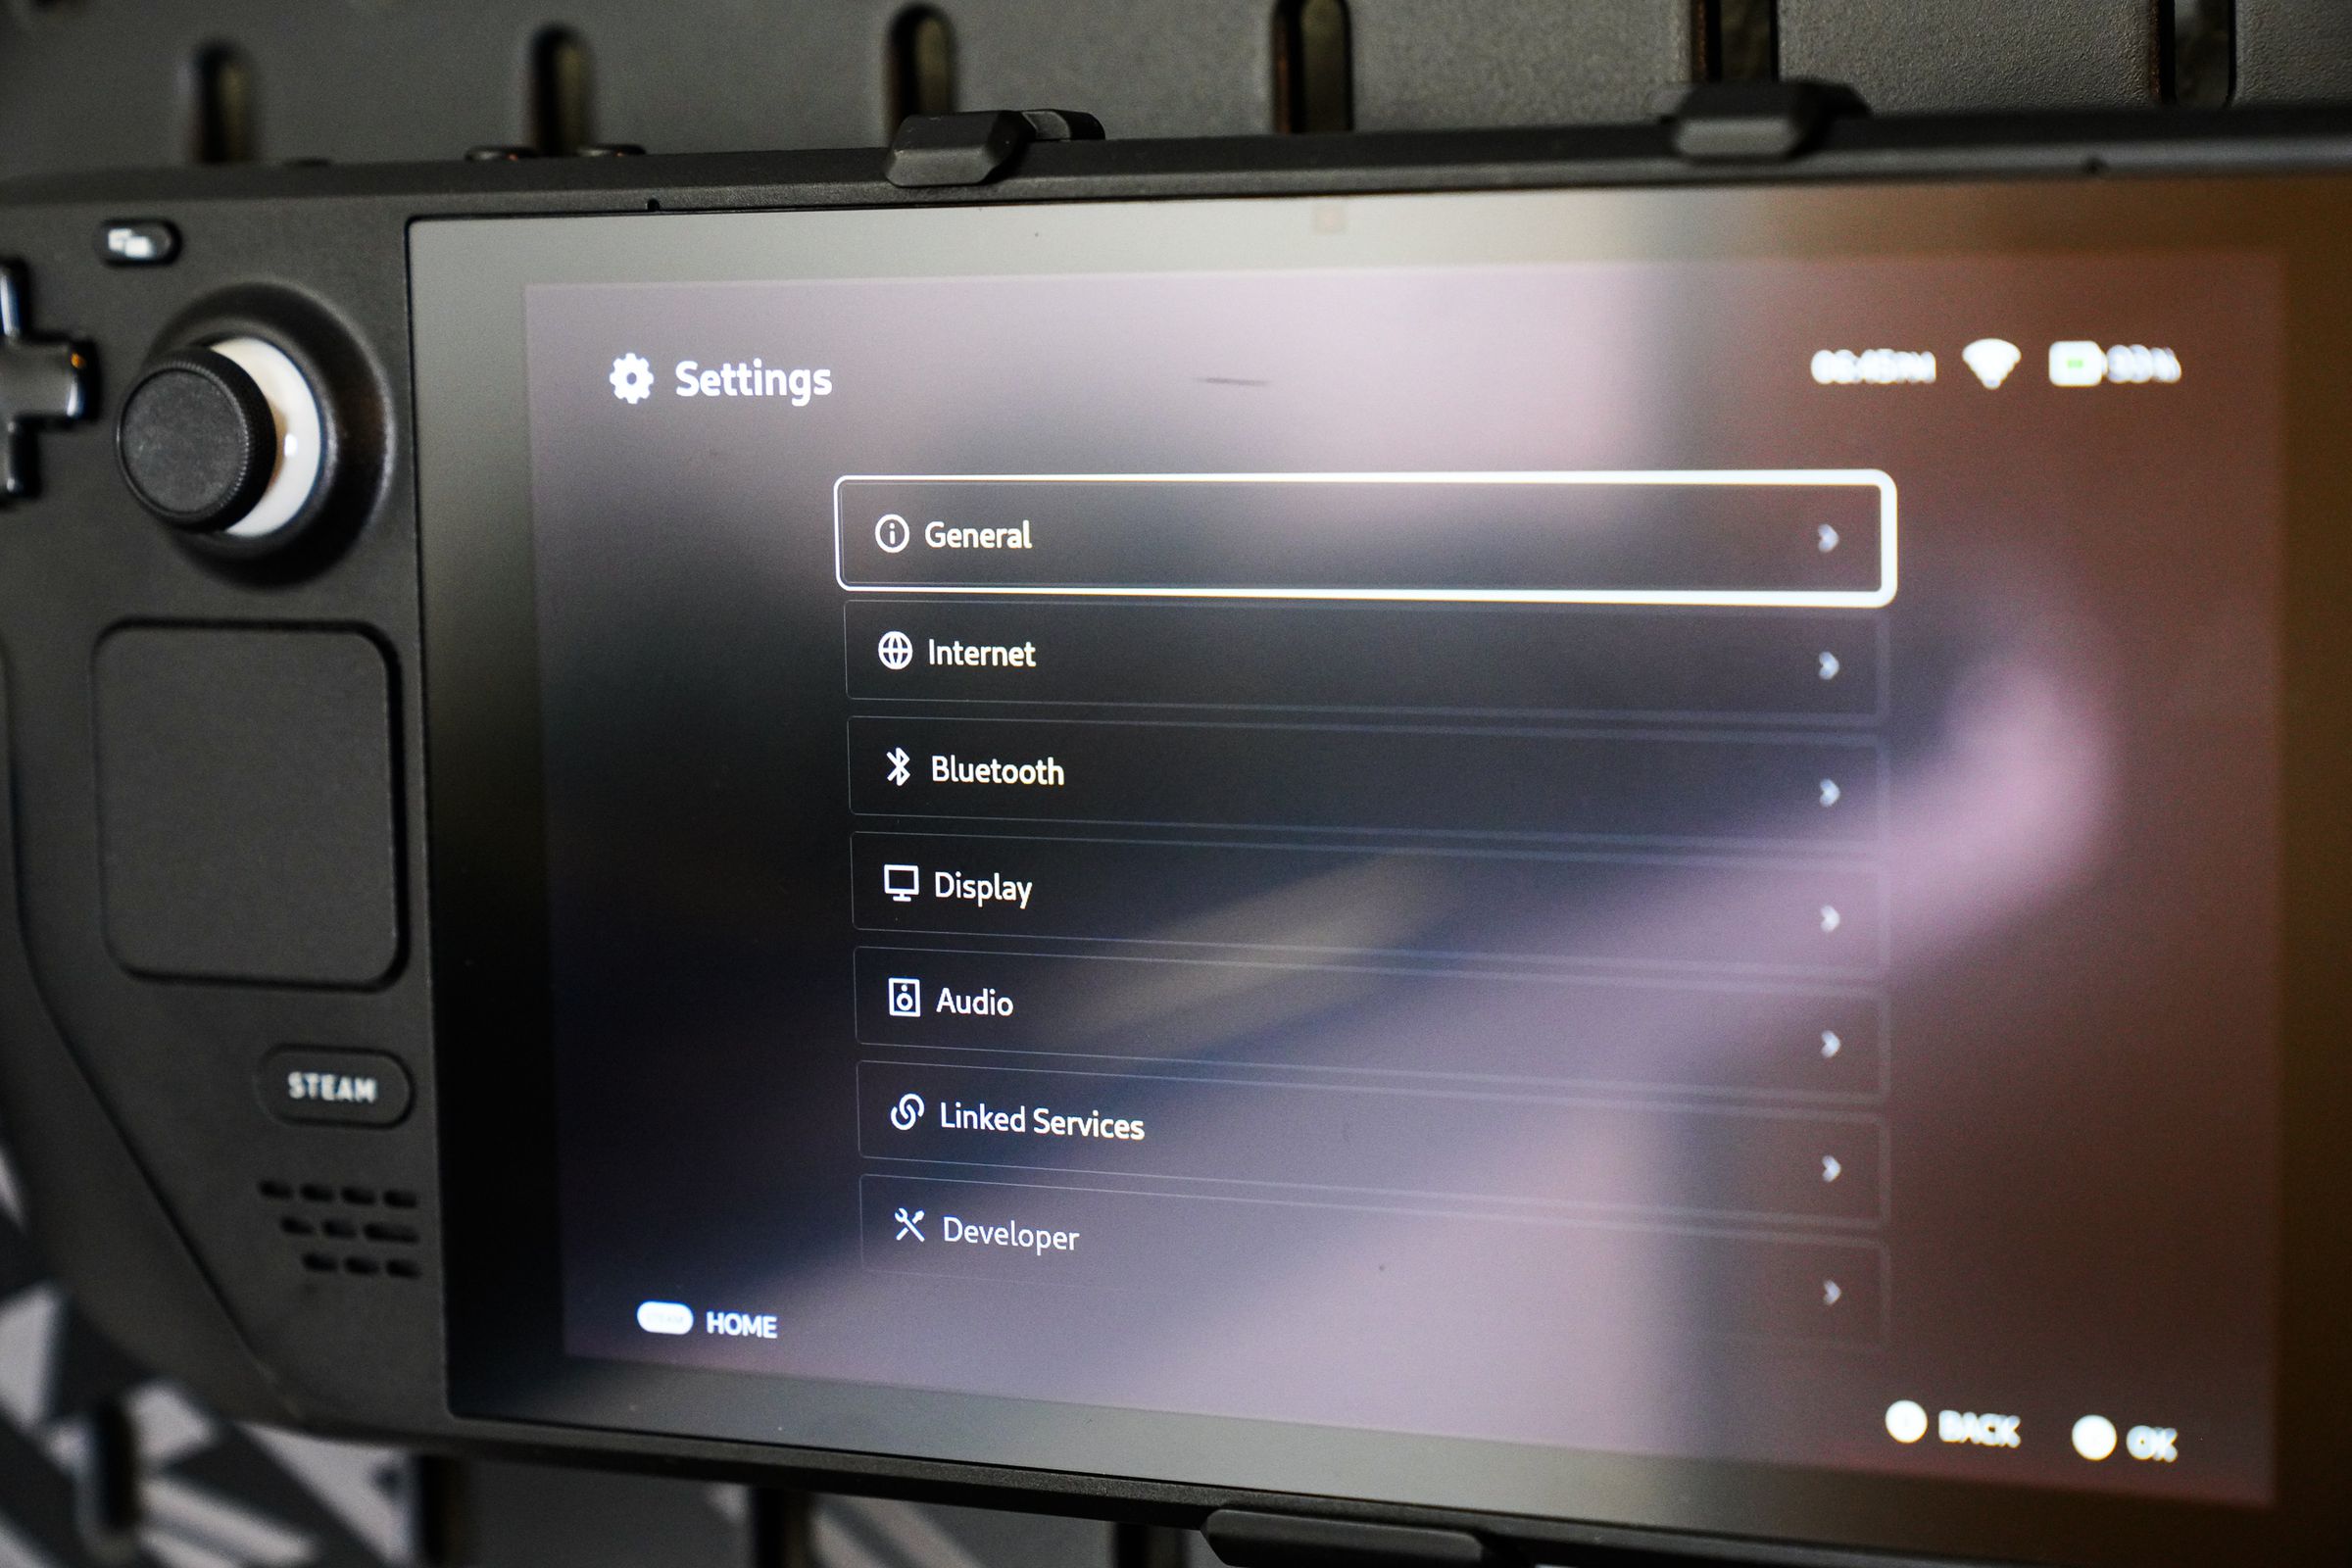 In the alpha, most settings menus are bare-bones. Wi-Fi, audio, and brightness adjustment all work, but there are no controller or performance adjustments, for example.